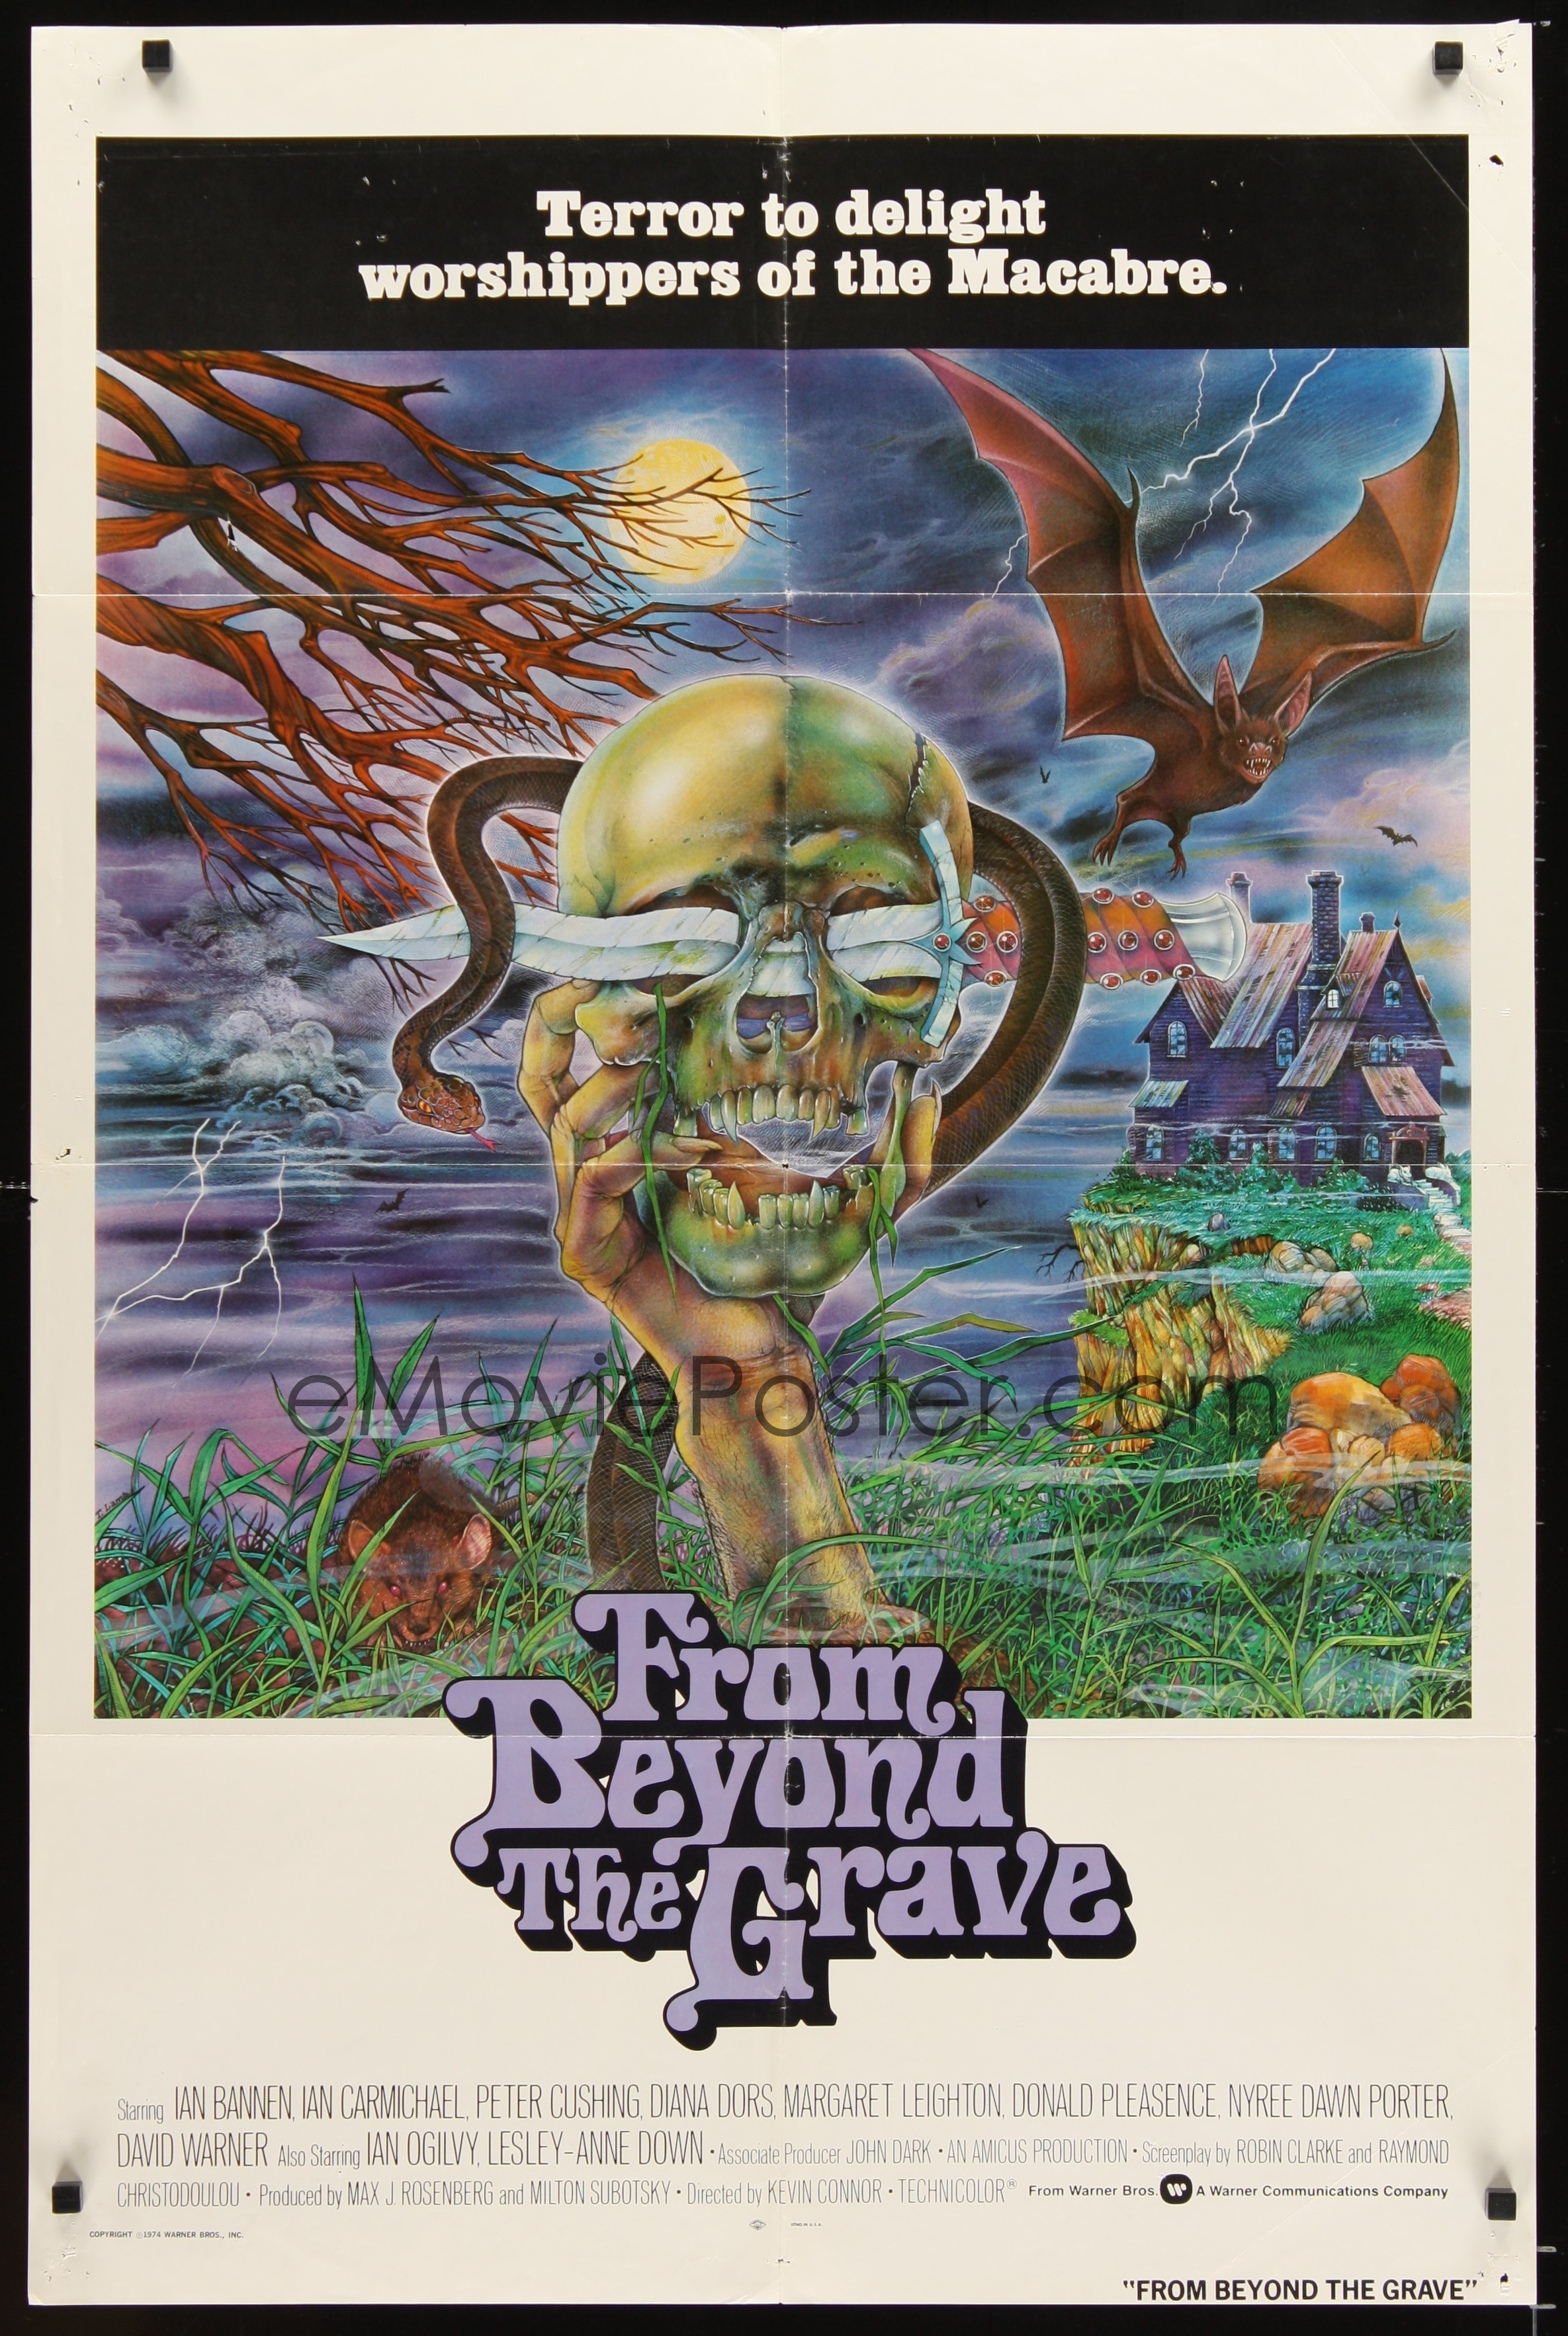 From Beyond The Grave [1974]